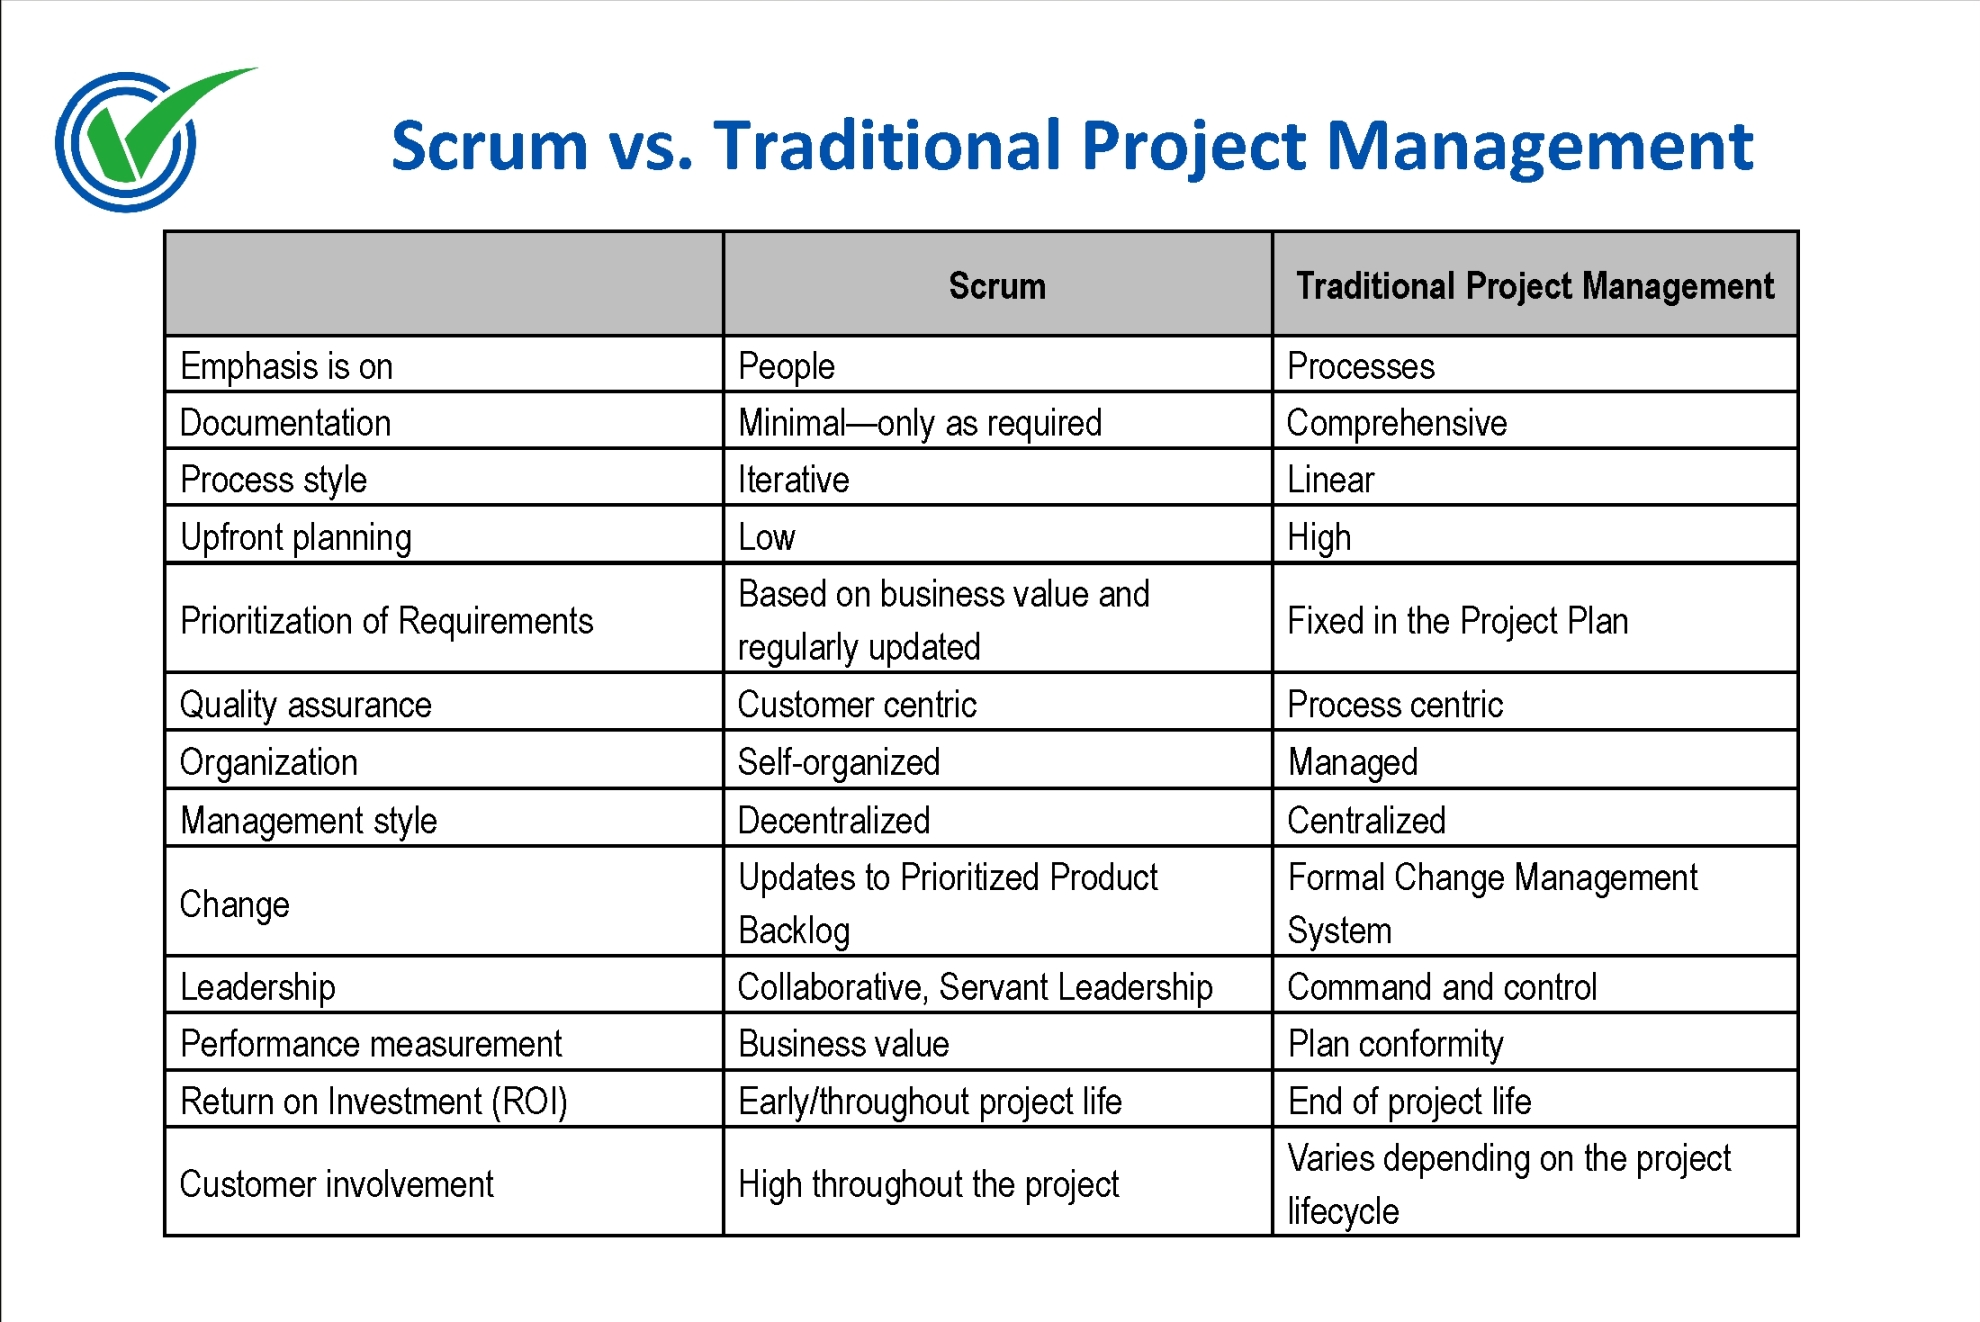 SCRUM vs. Traditional Project Management